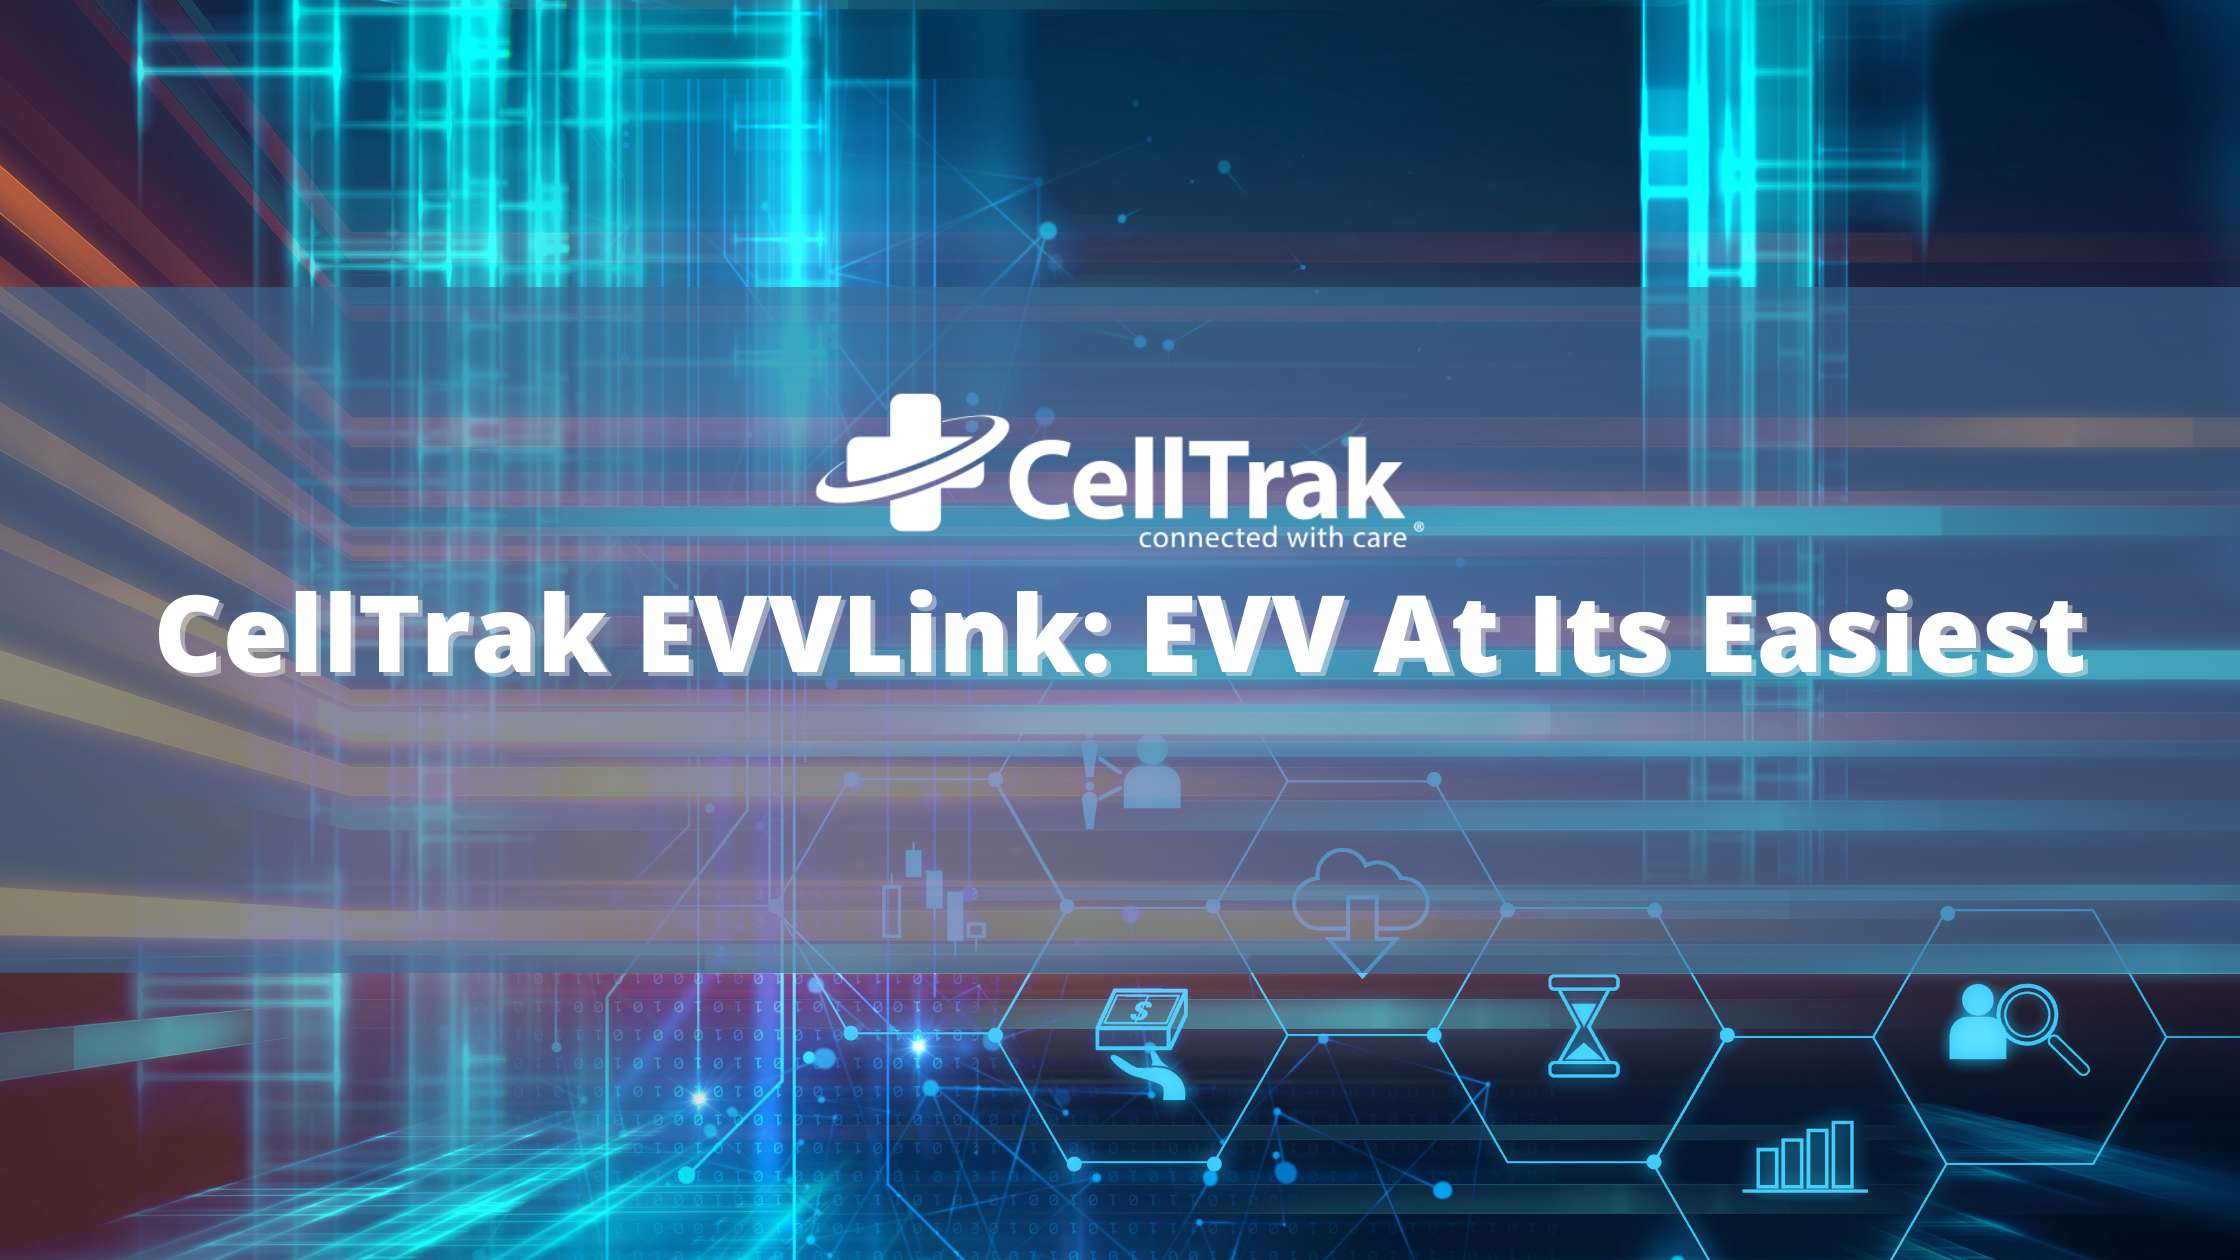 CellTrak technology looking background, EVV at its easiest